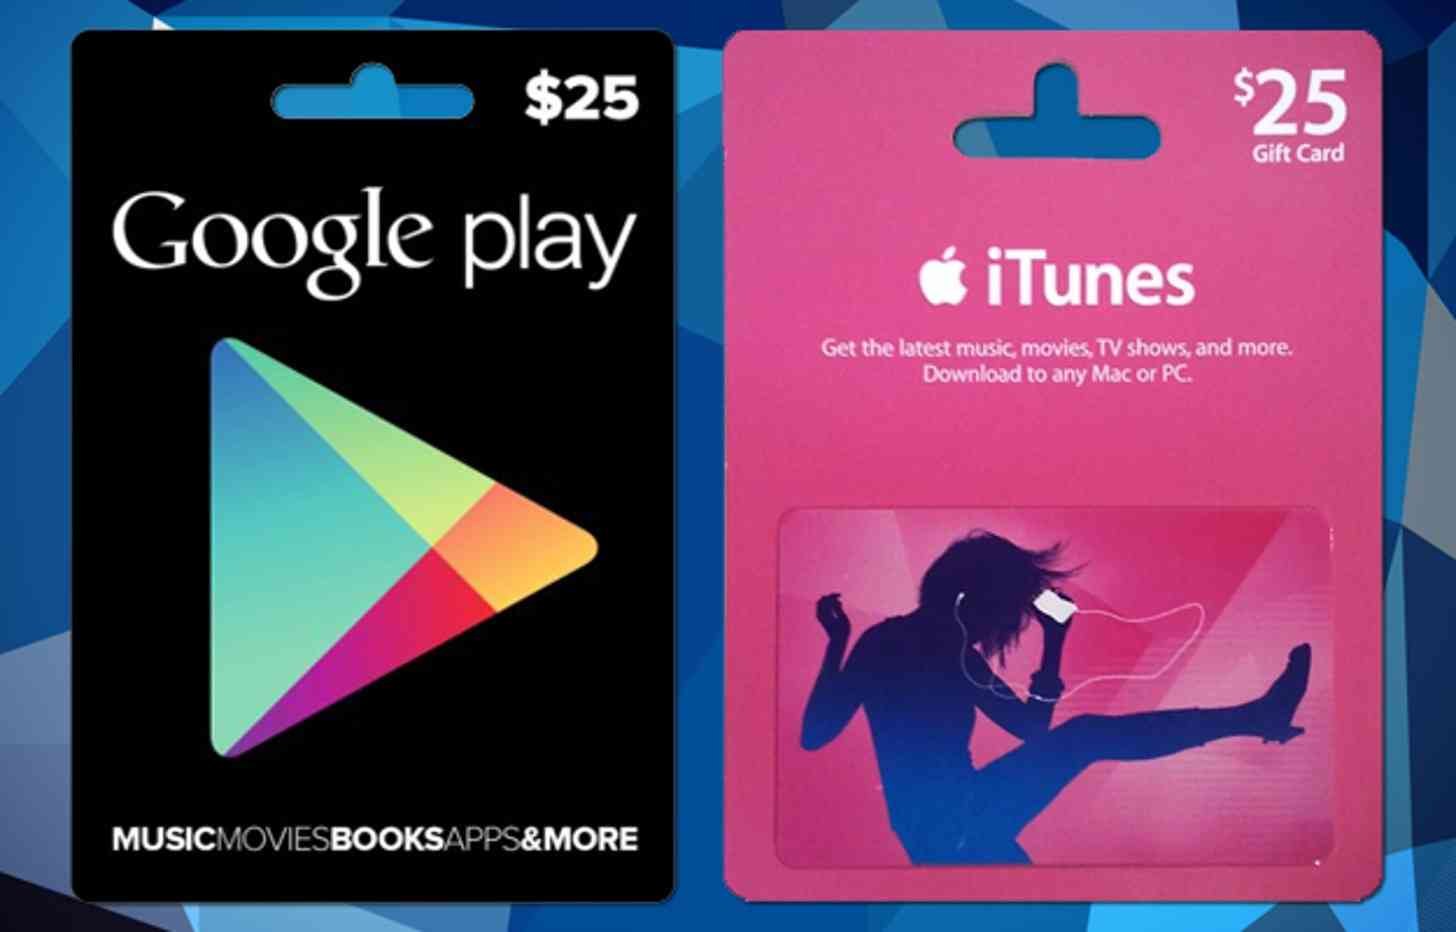 Google Play iTunes gift cards